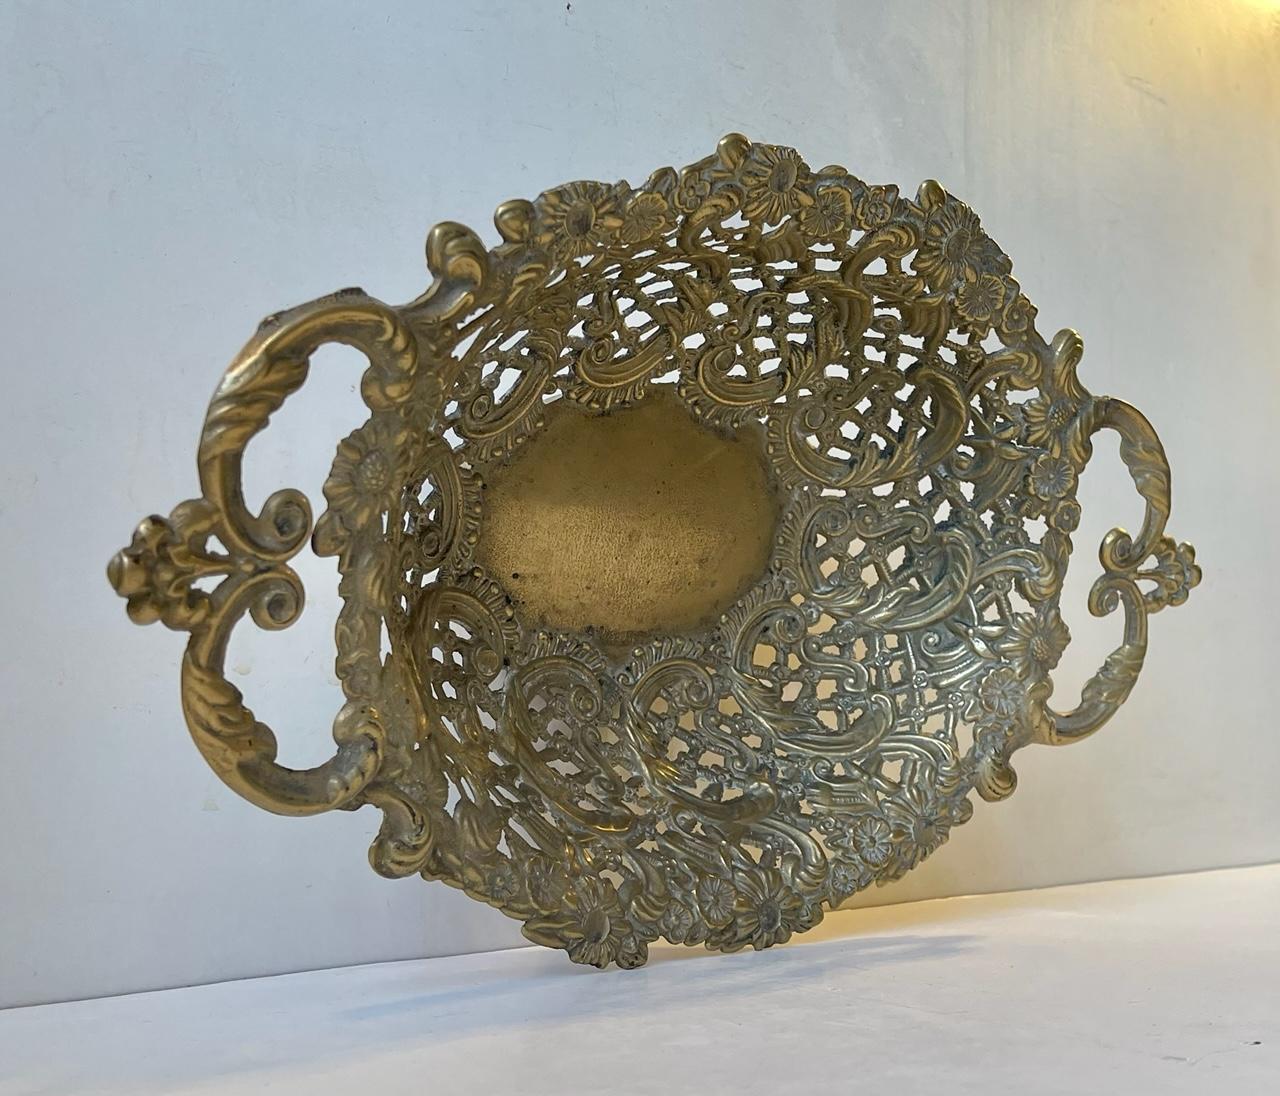 An Italian Openwork/filigree/pierced basket or bowl for fruit bread or decorative purposes. Its made from solid cast brass that has patinated beautifully over the years. It was made in Italy circa 1970-80 after classical inspired ideals.